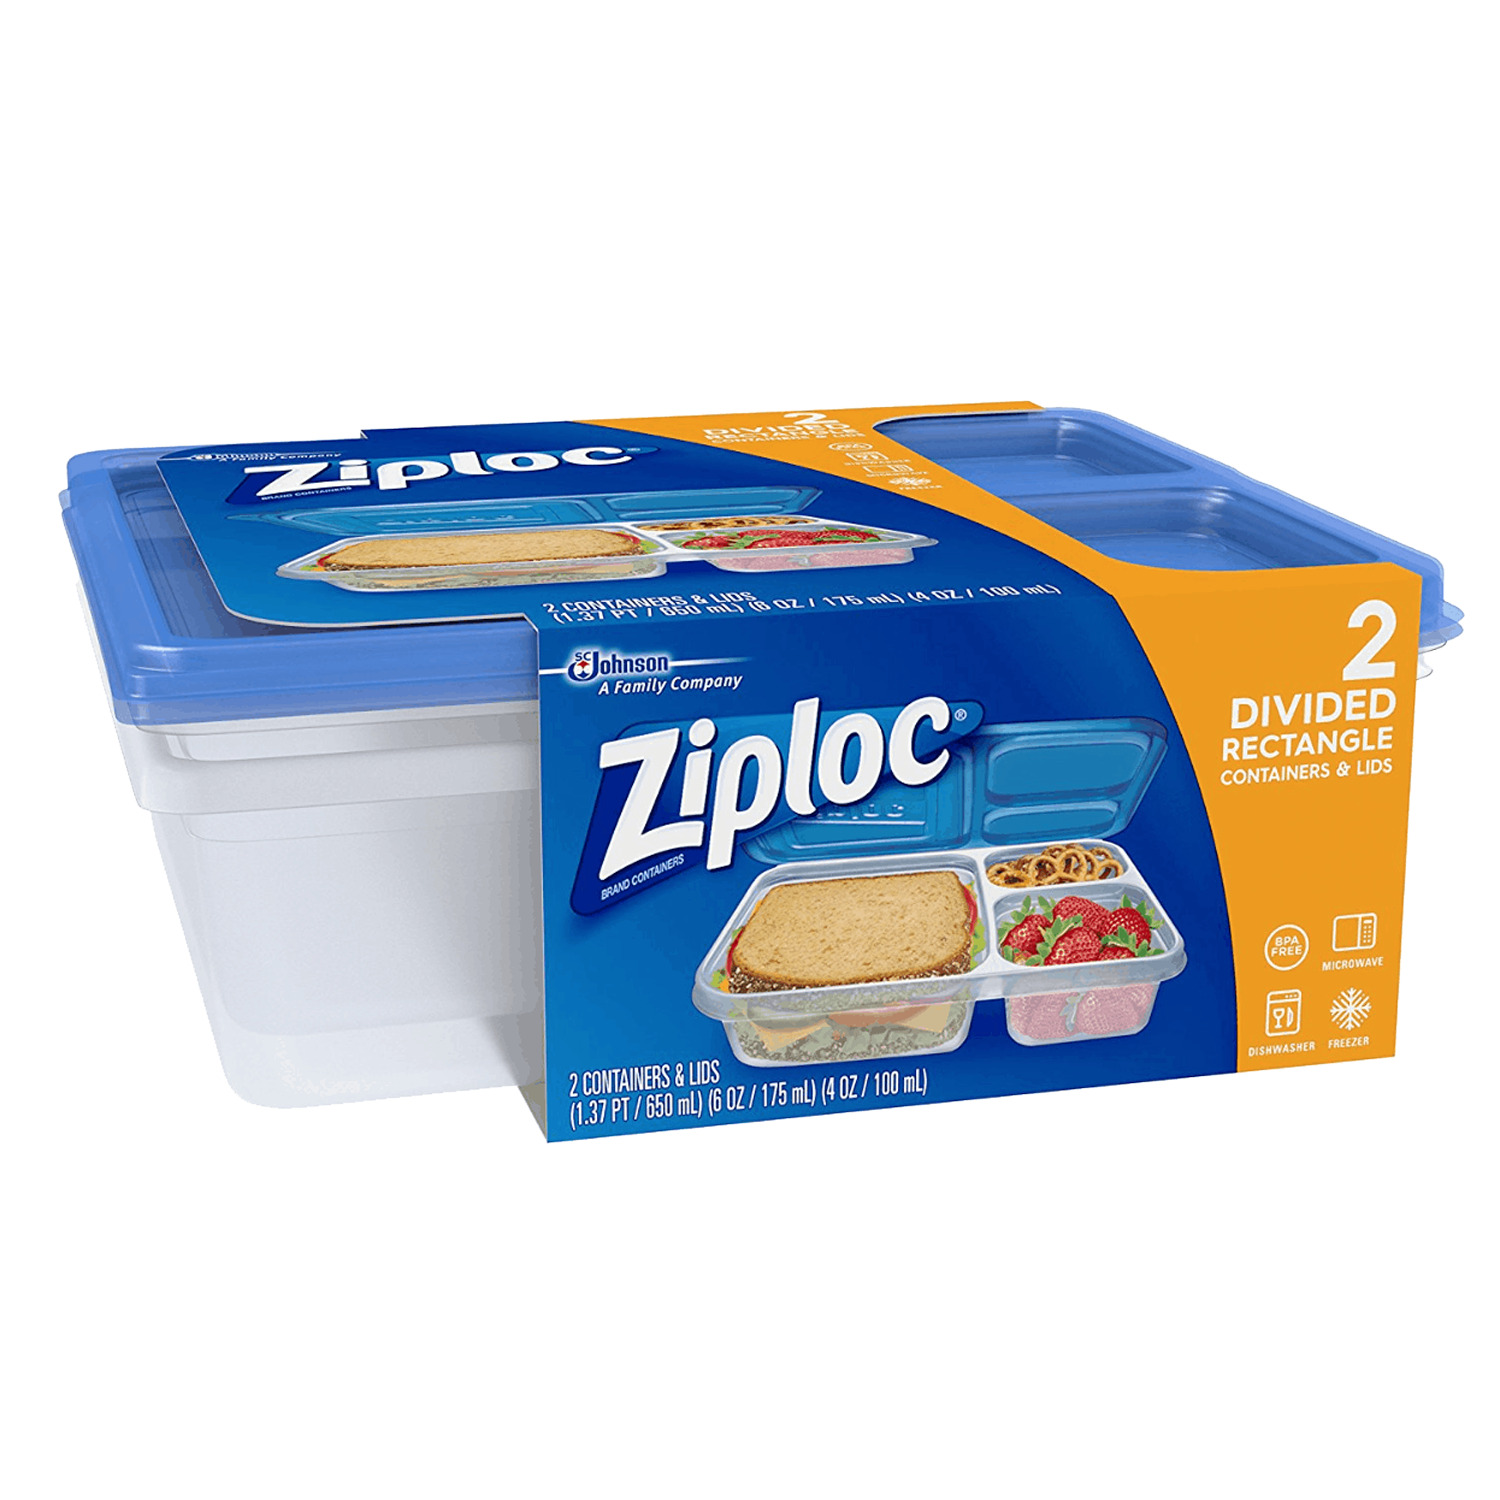 https://www.rossy.ca/media/A2W/products/ziploc-divided-rectangle-containers-and-lids-pk-of-2-86738-1.jpg